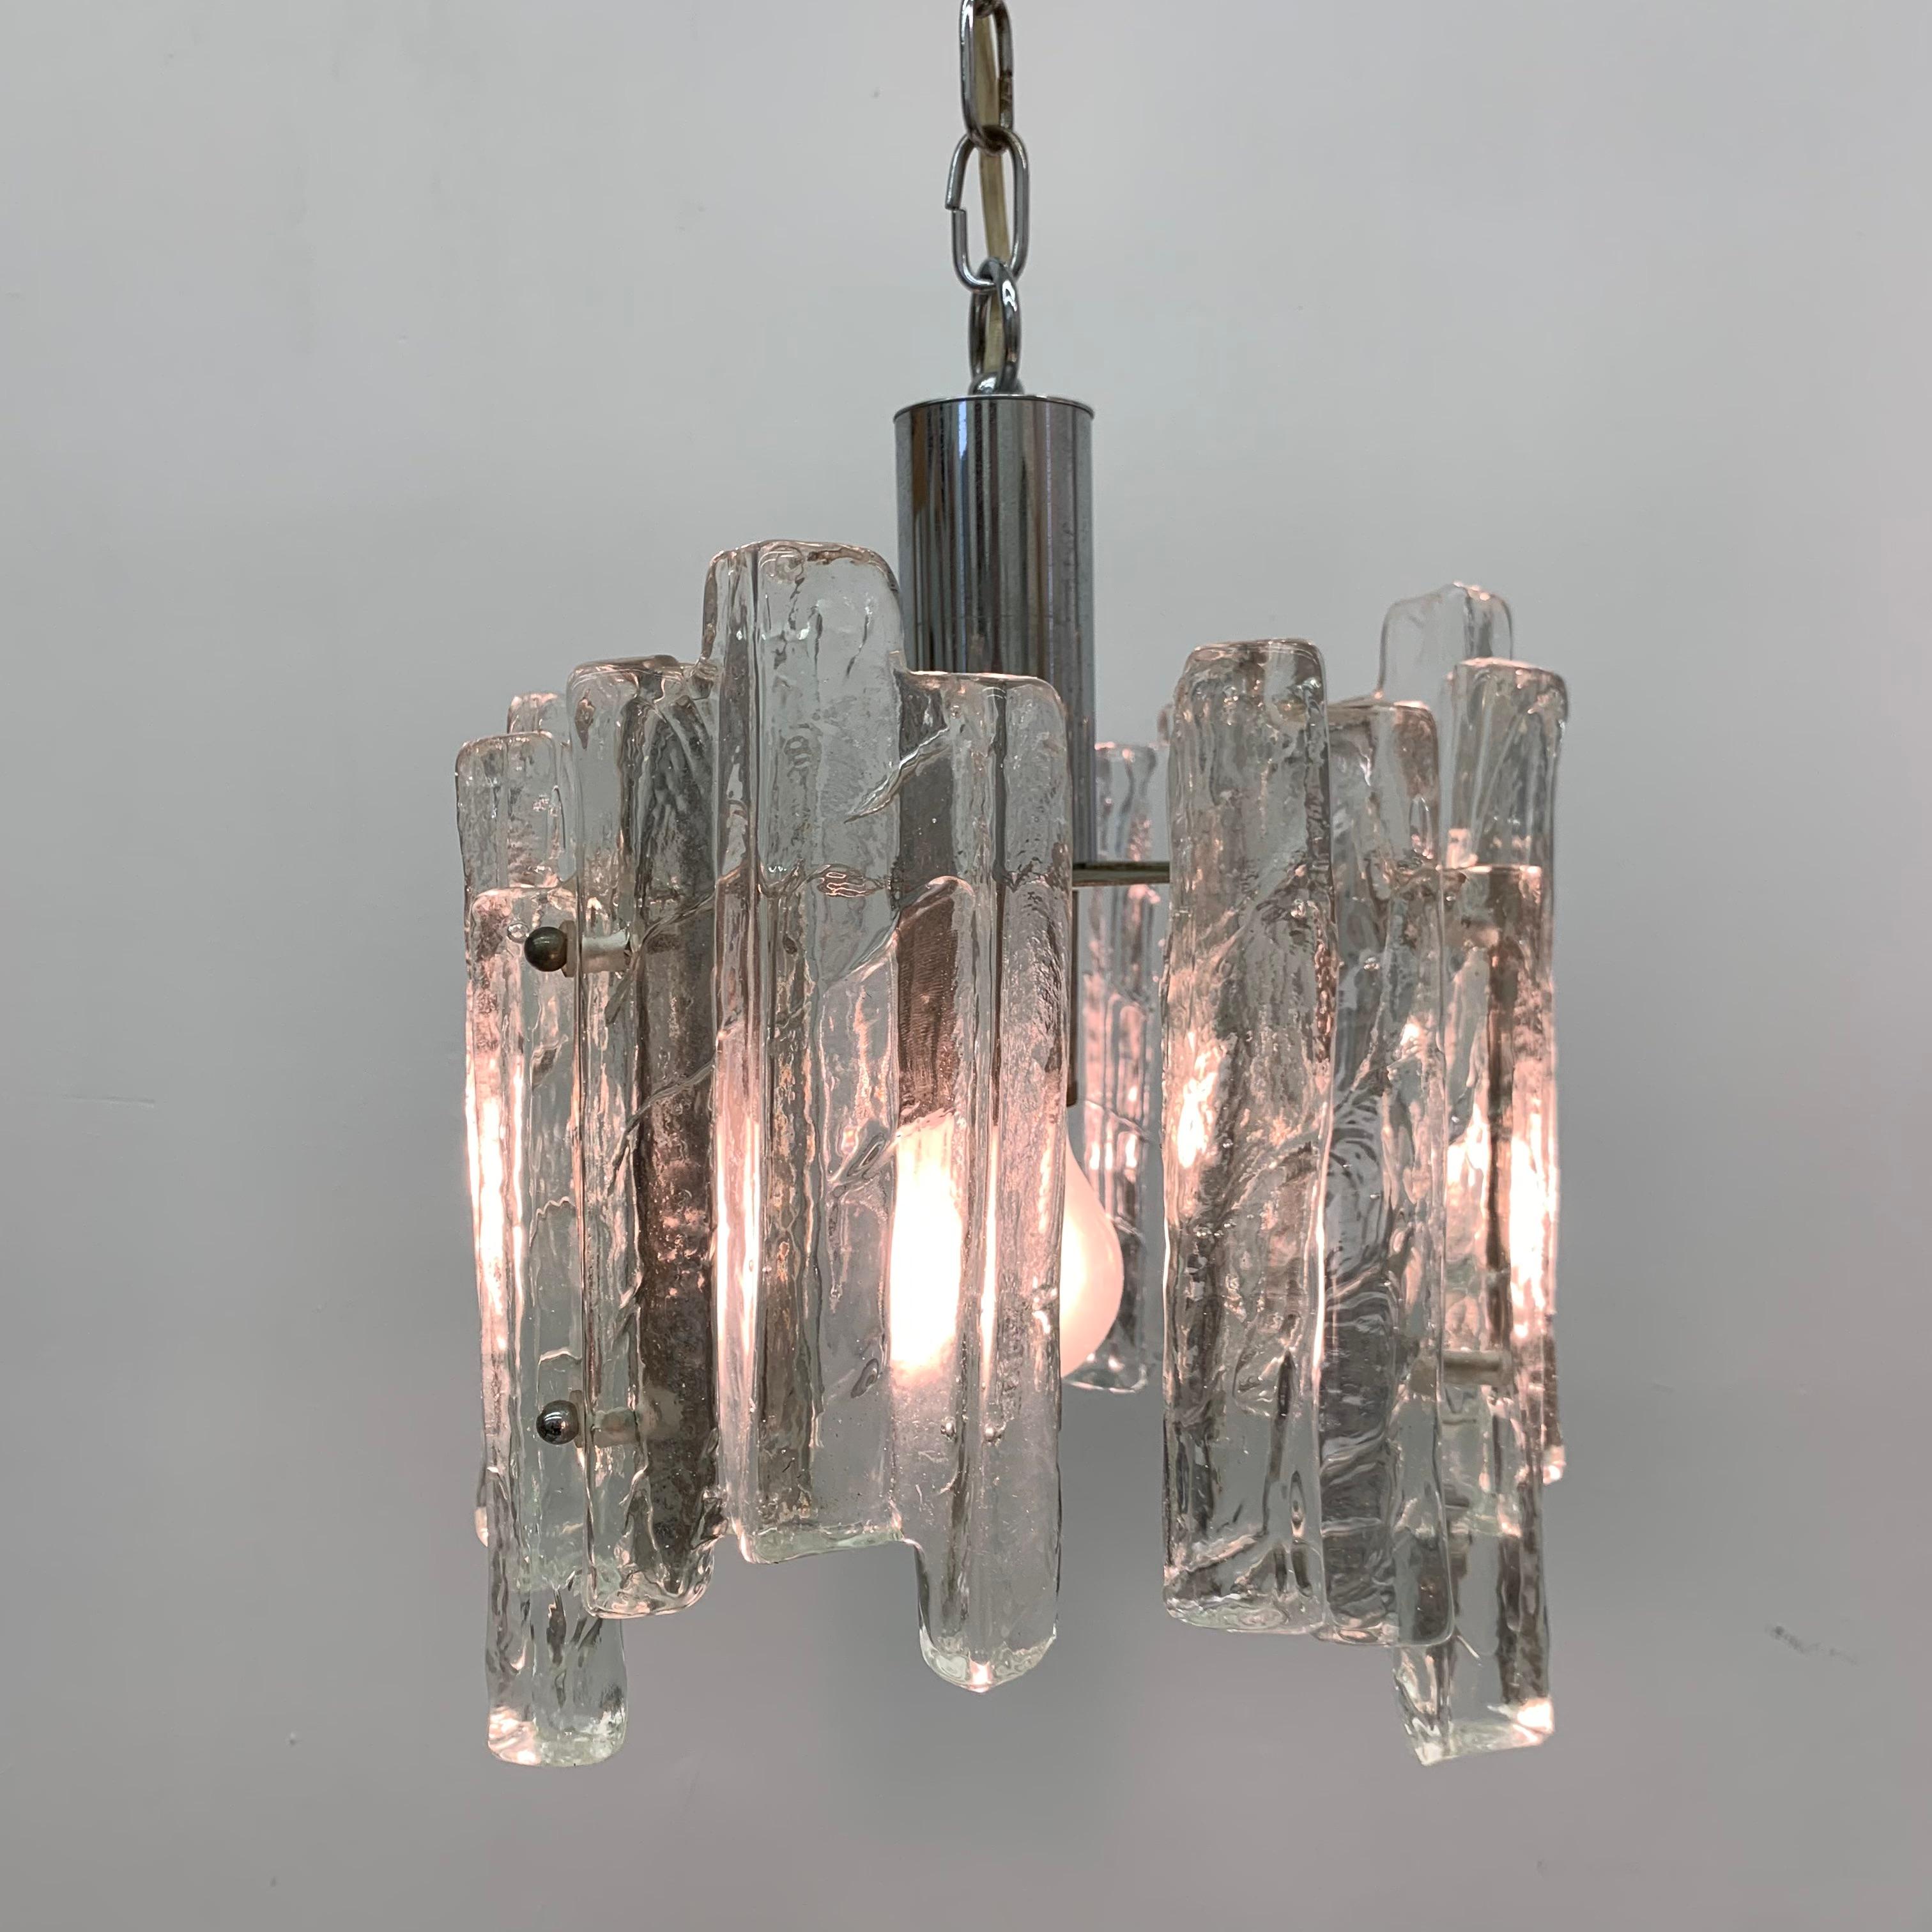 Hanging lamp in Frosted Ice Glass by J. T. Kalmar for Kalmar Franken KG, 1960s For Sale 10